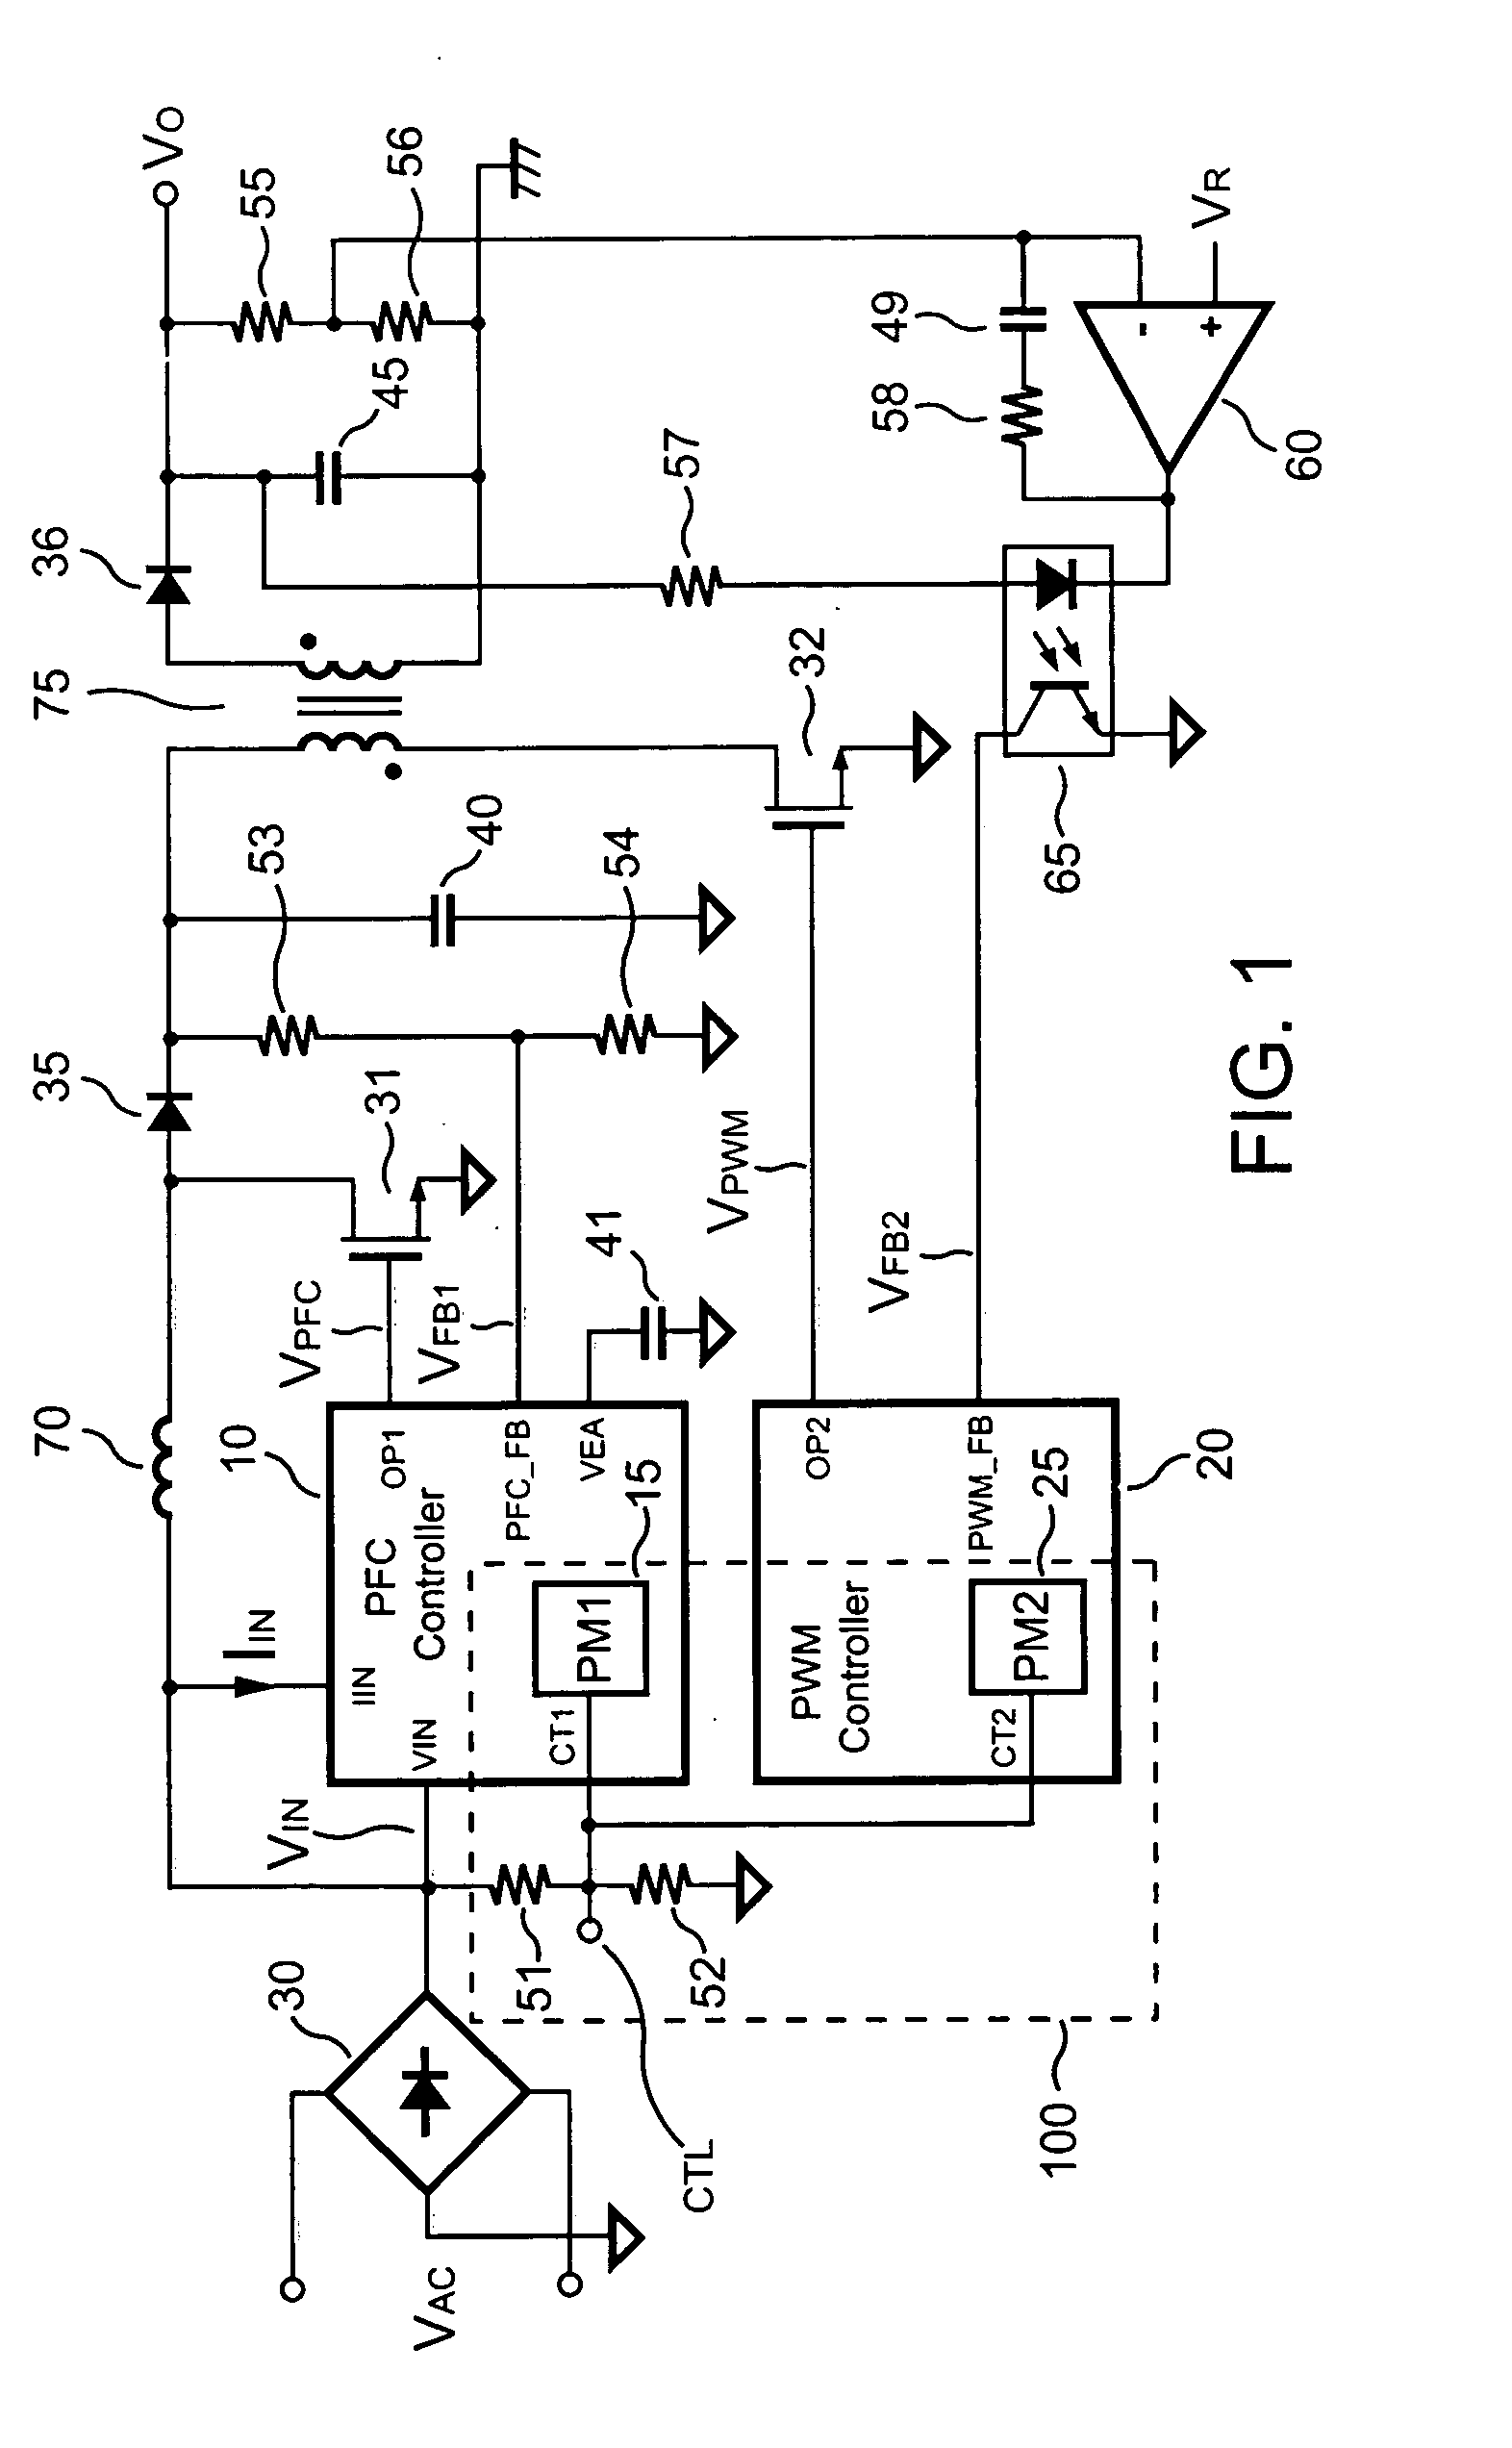 Apparatus for reducing the power consumption of a PFC-PWM power converter